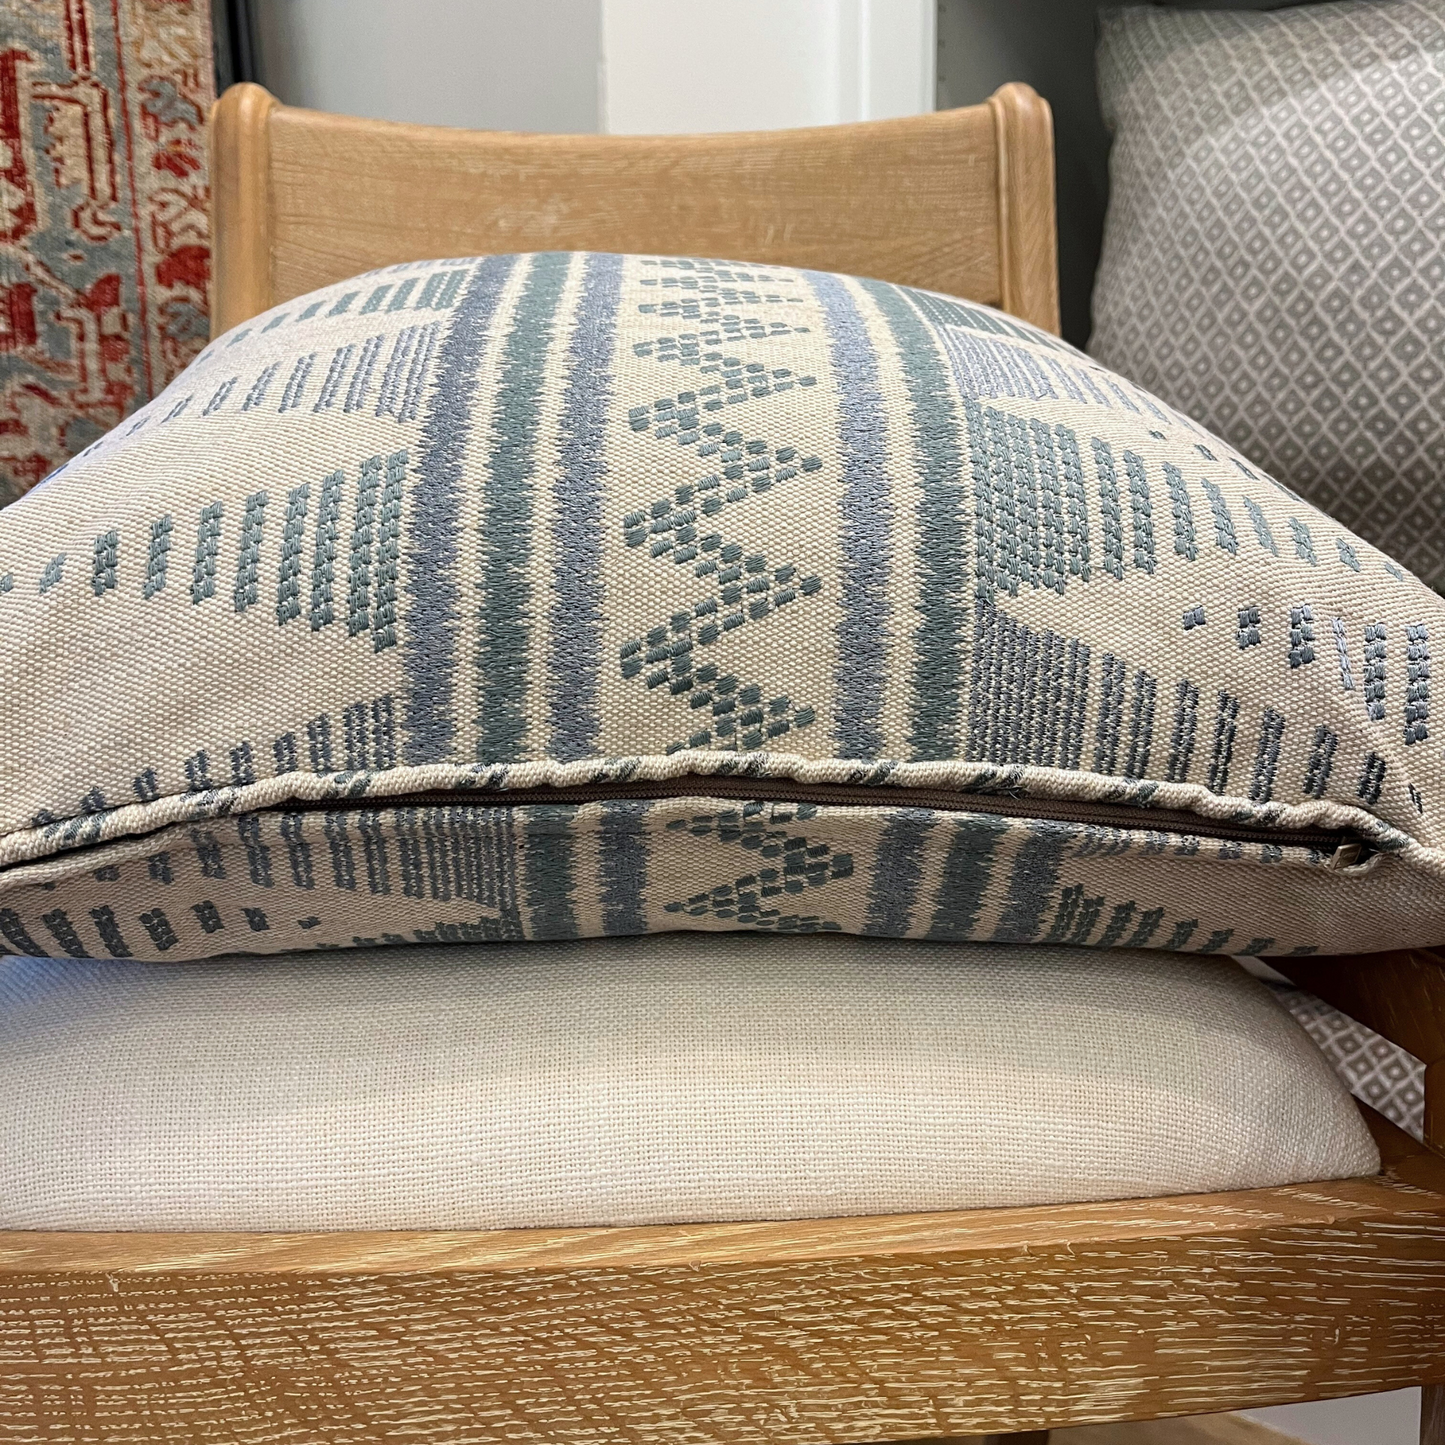 22" x 22" Pillow - Embroidered Zig Zag in Cadet Blue